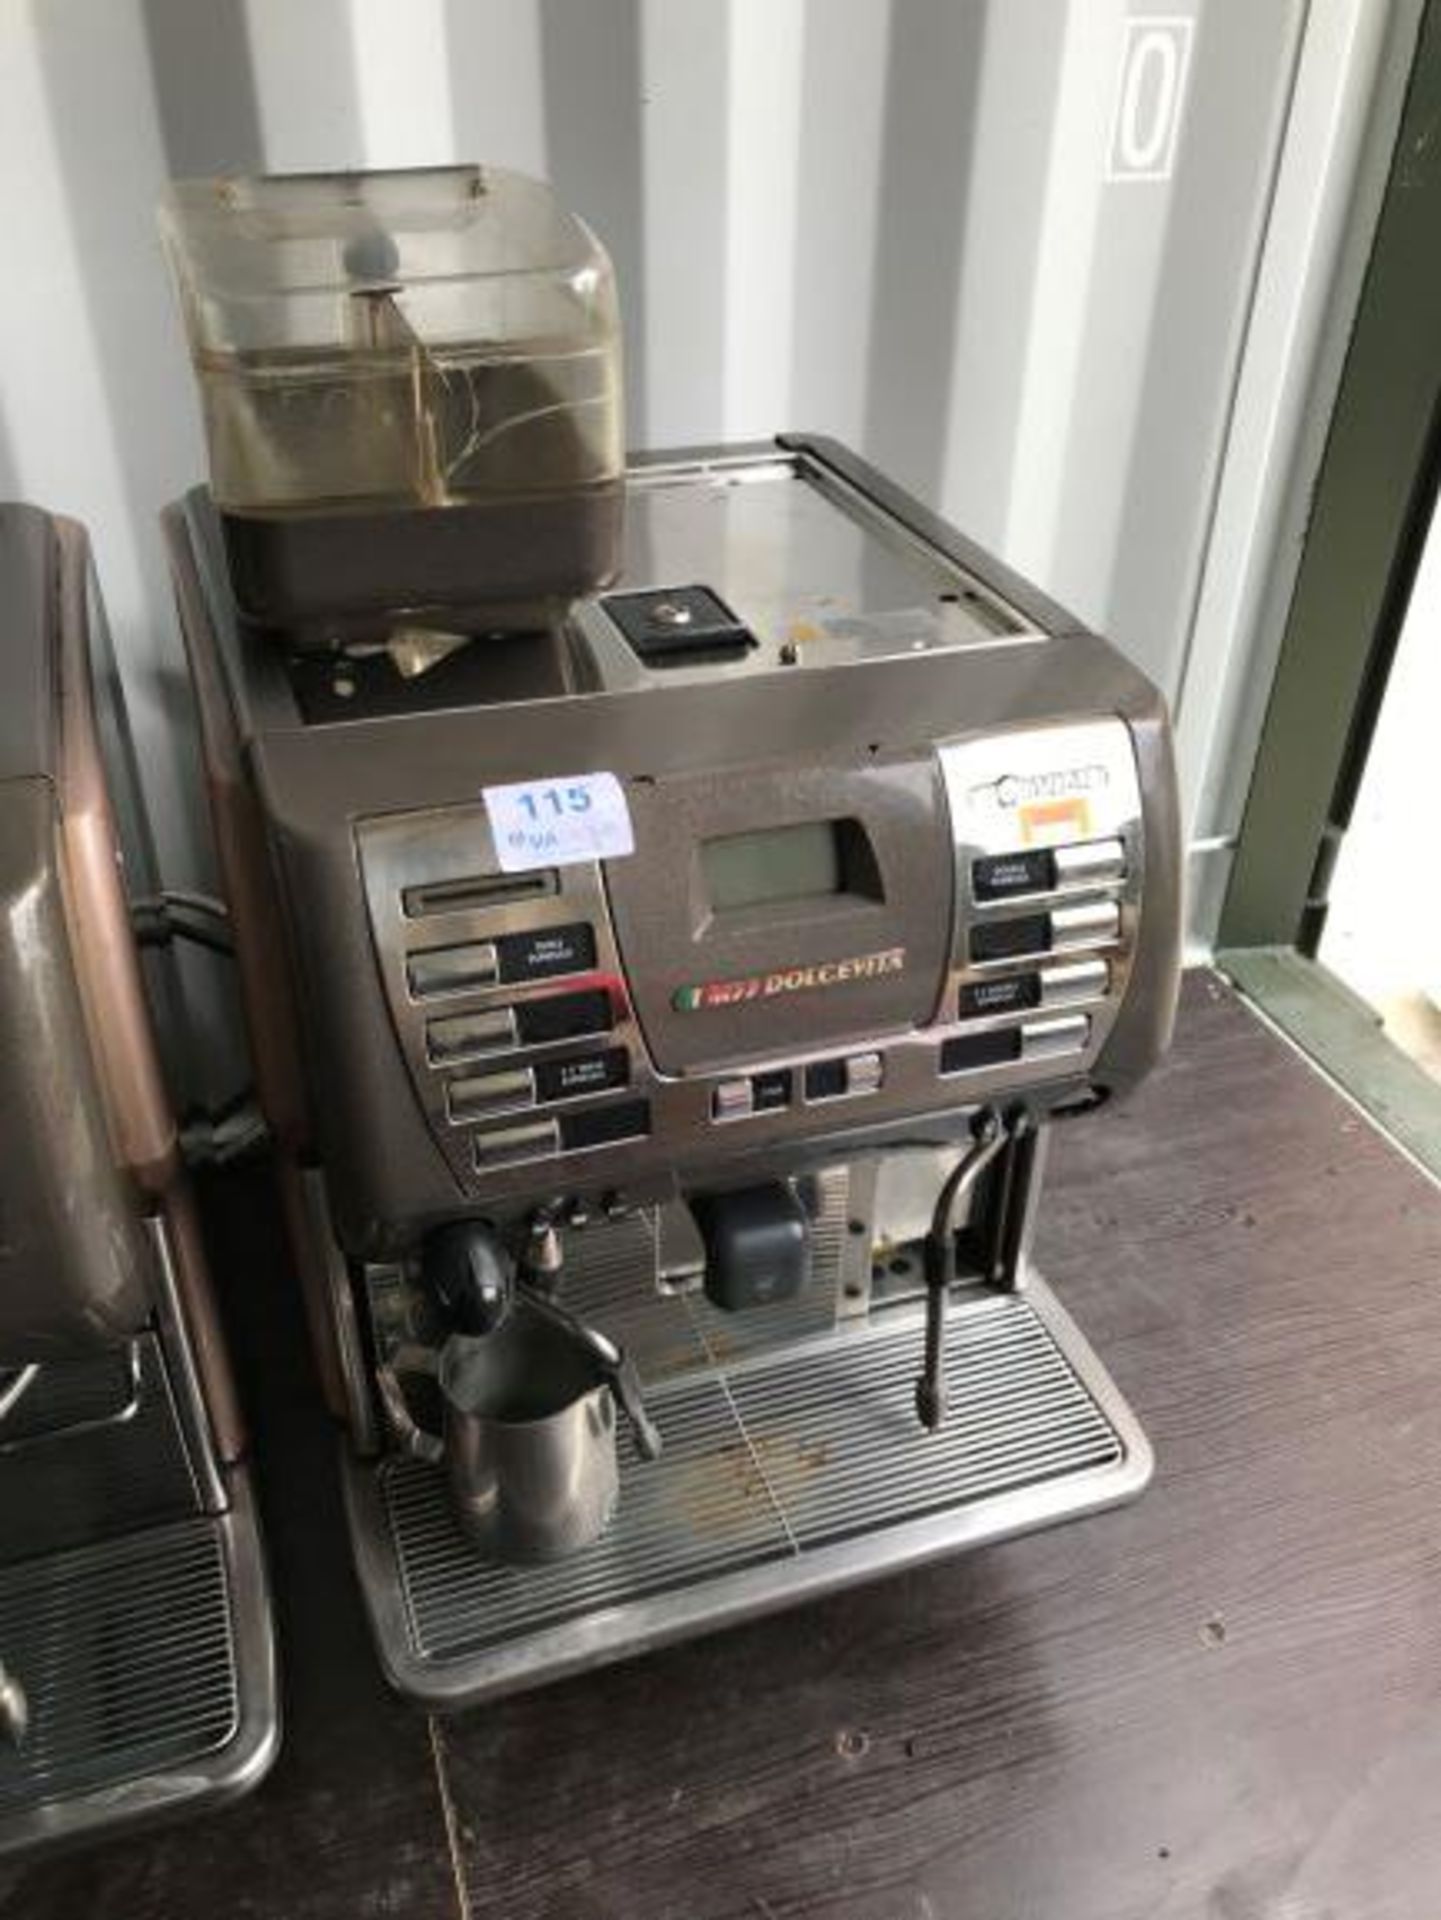 La Cimbali M53 Dolcevita Automatic Commercial Coffee Machine - Image 2 of 4